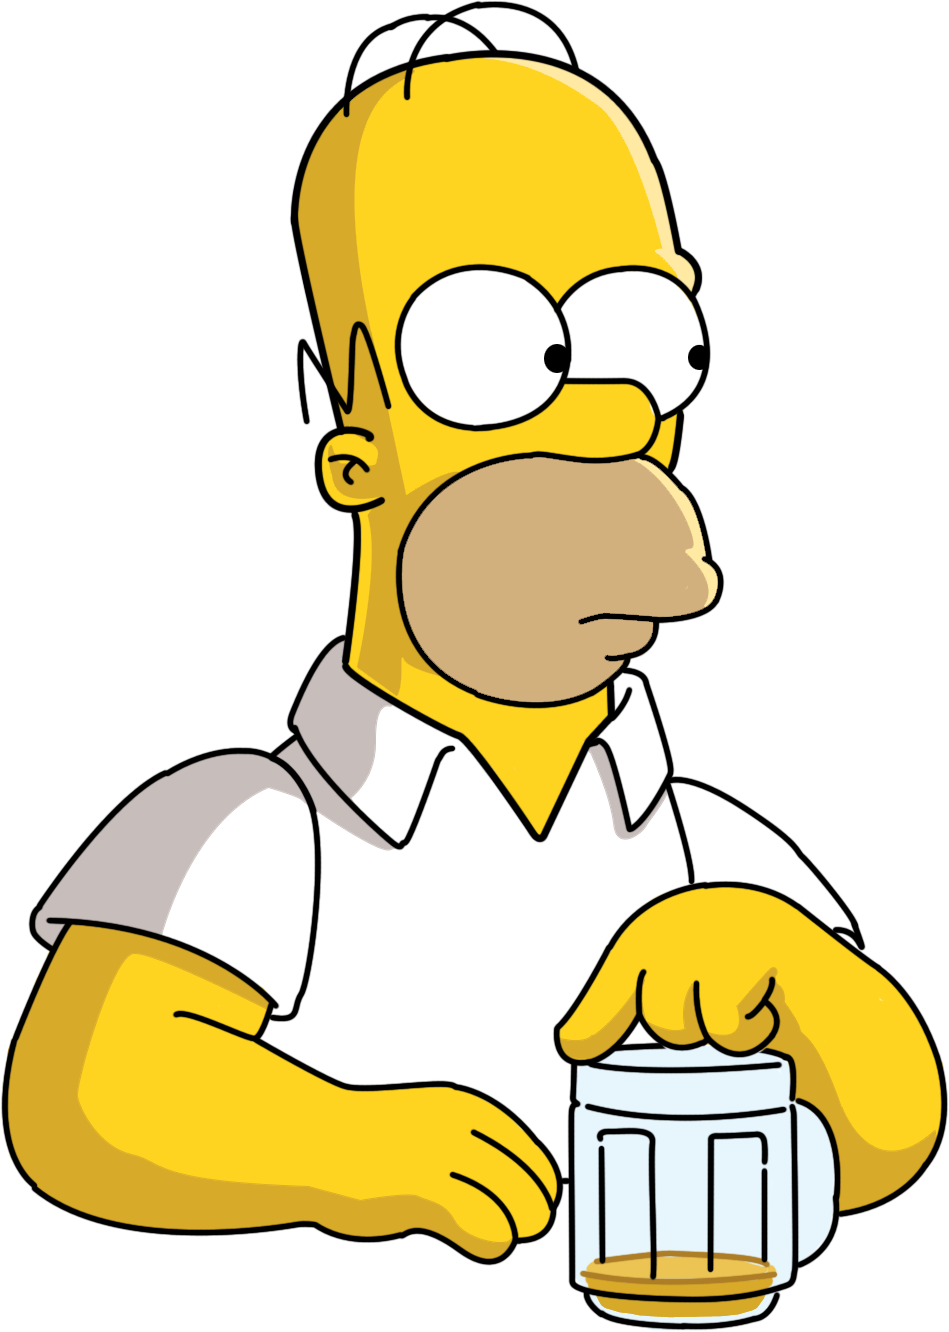 "relax, Those Pious Morons Are Too Busy Talking To - Homer Simpson (949x1332)